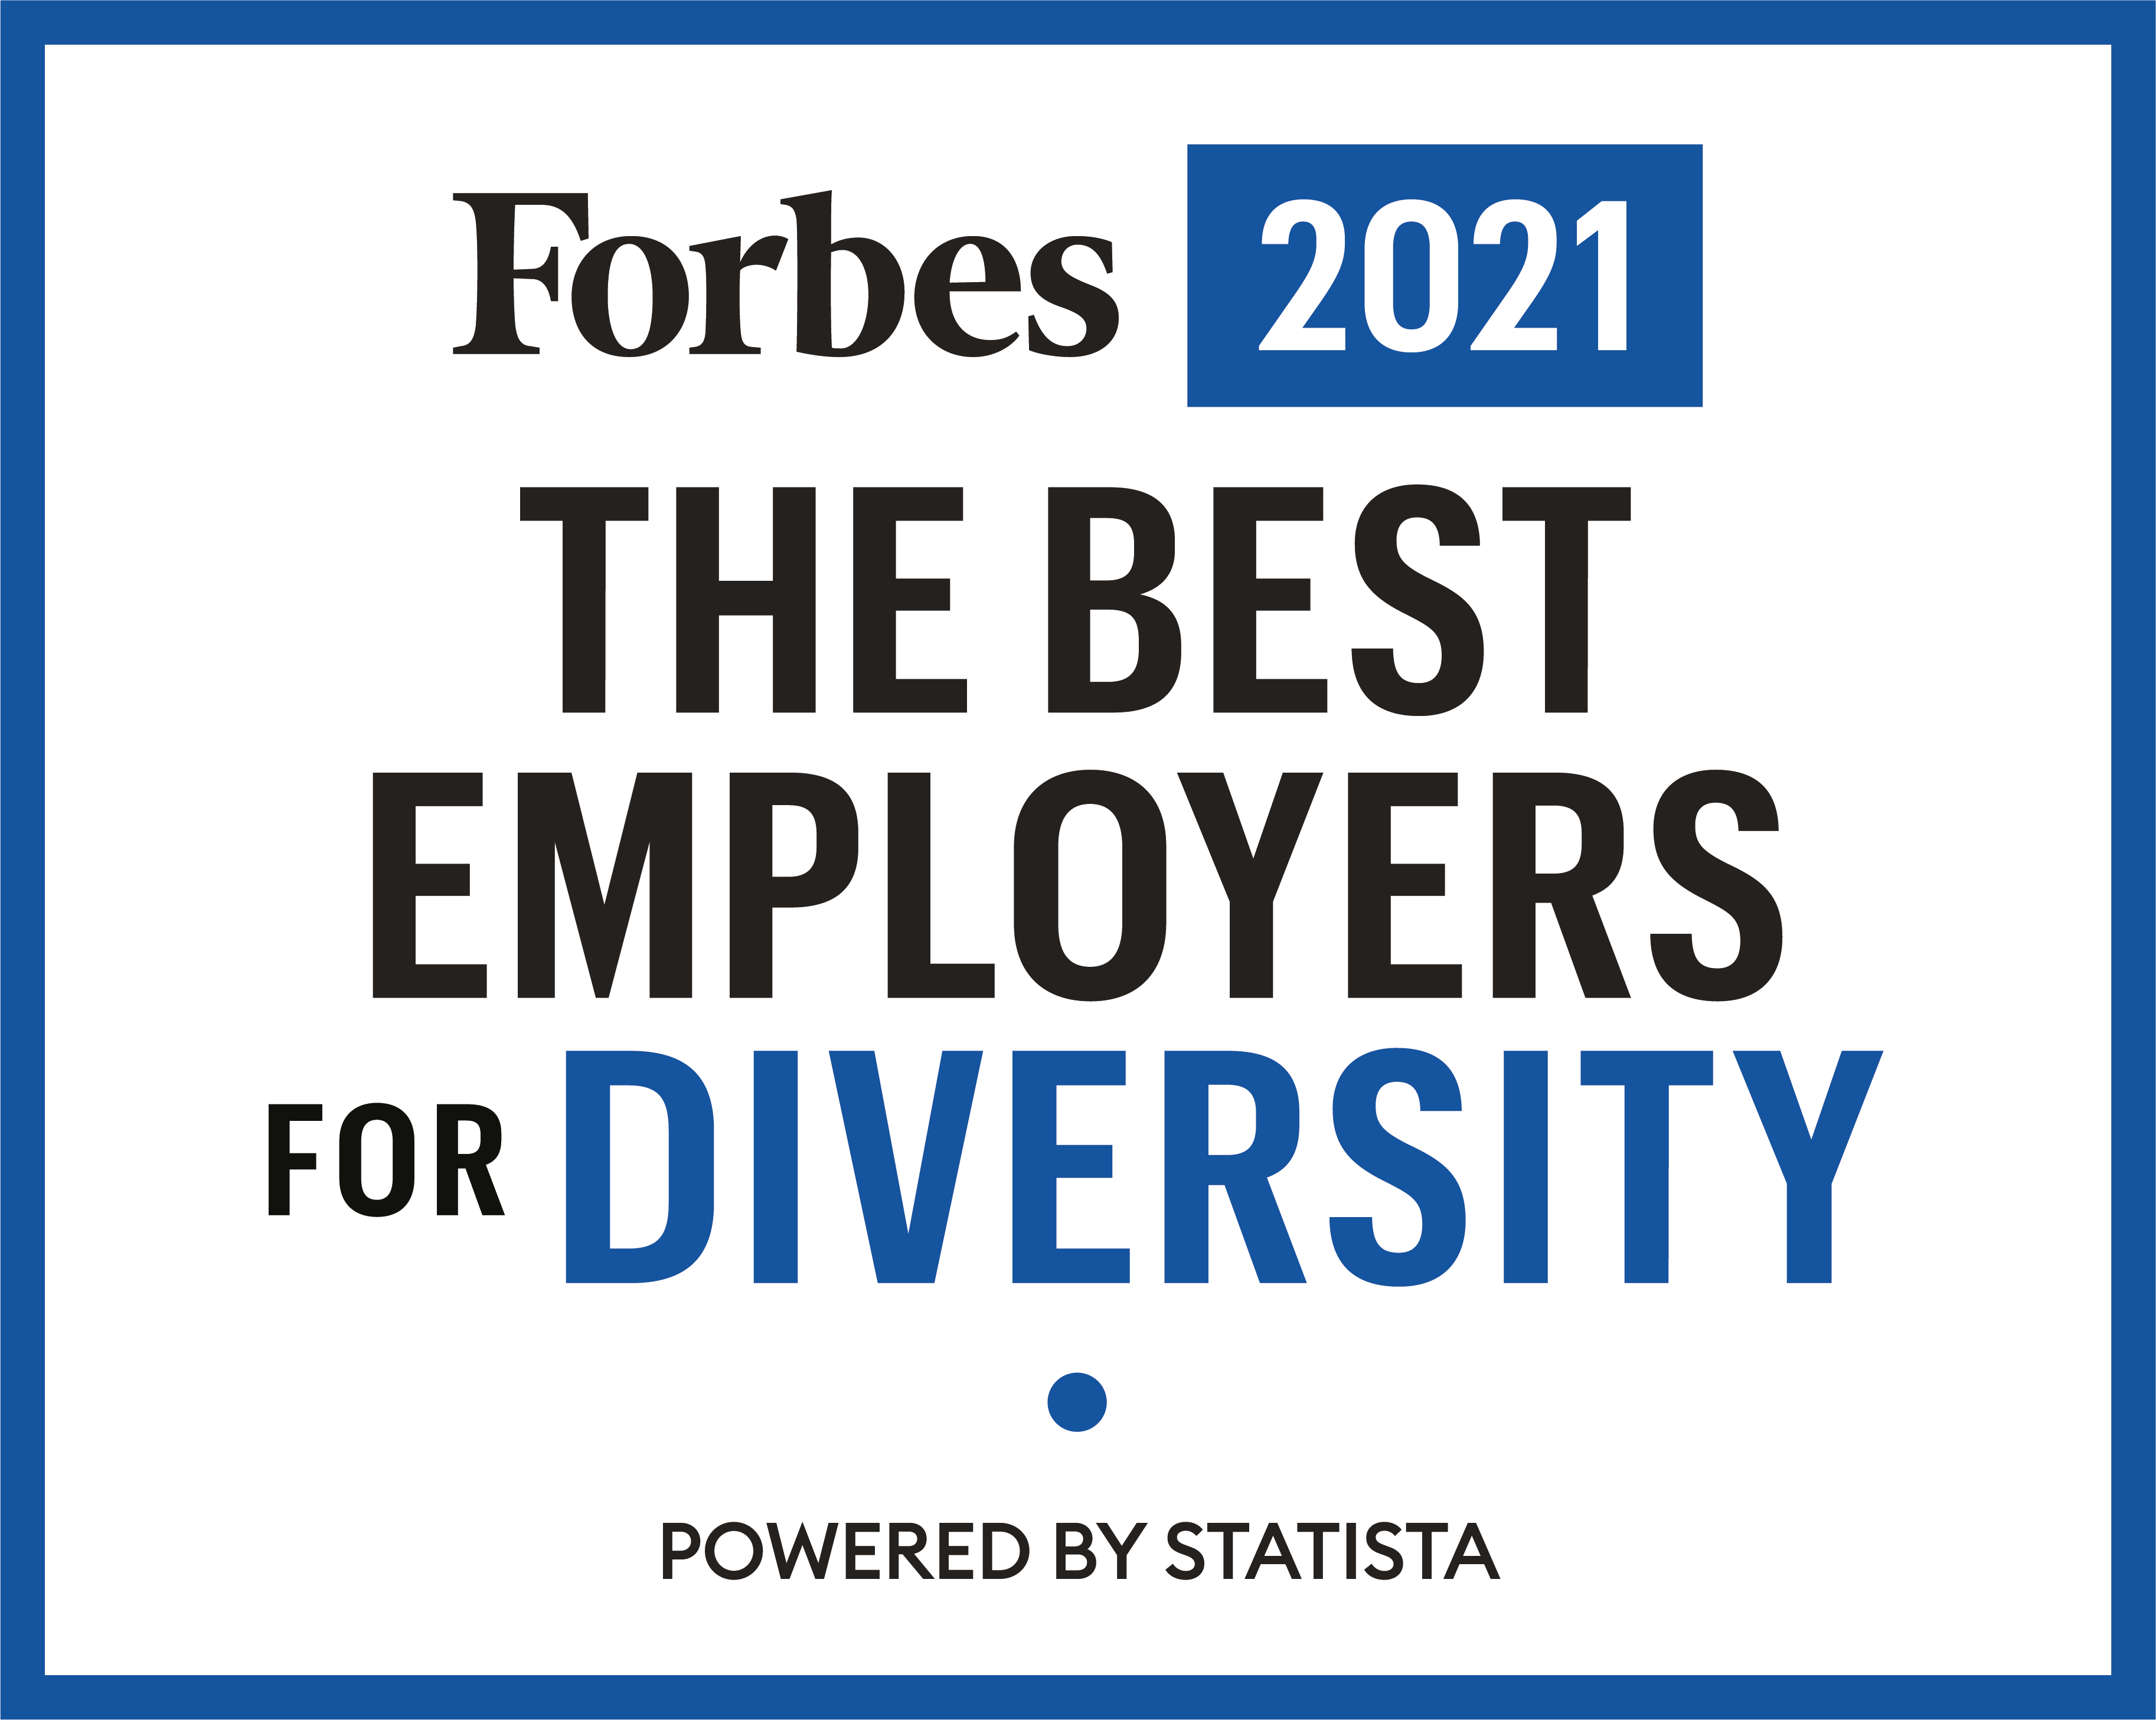 Forbes 2021: The BEST EMPLOYERS for Diversty